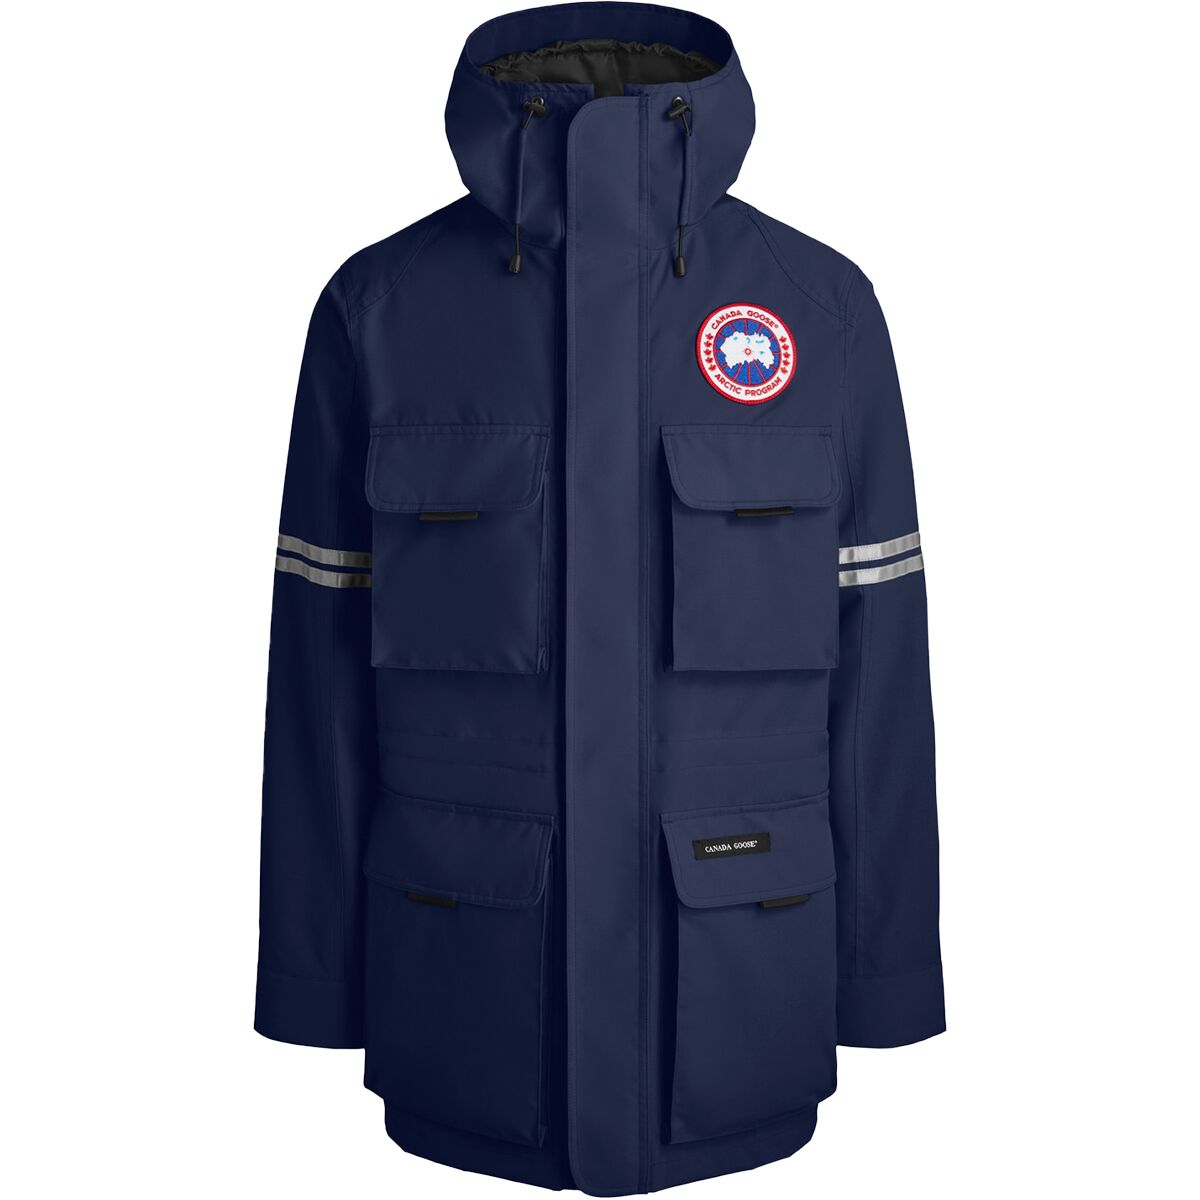 Canada Goose Science Research Jacket - Men's - Clothing